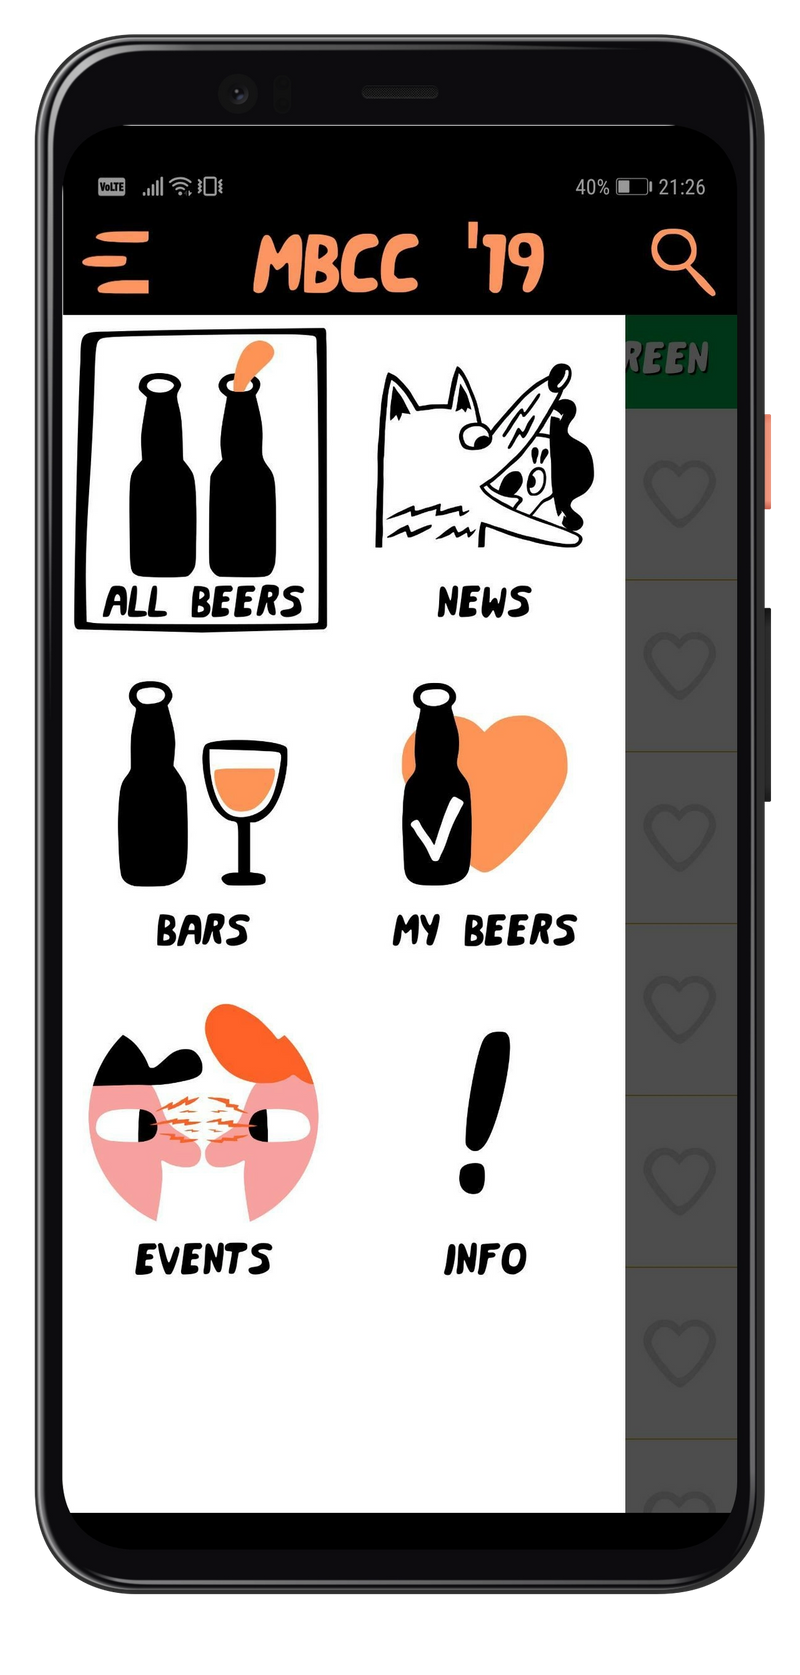 Mobile app menu using Mikkeller's distinct art style, created by Keith Shore